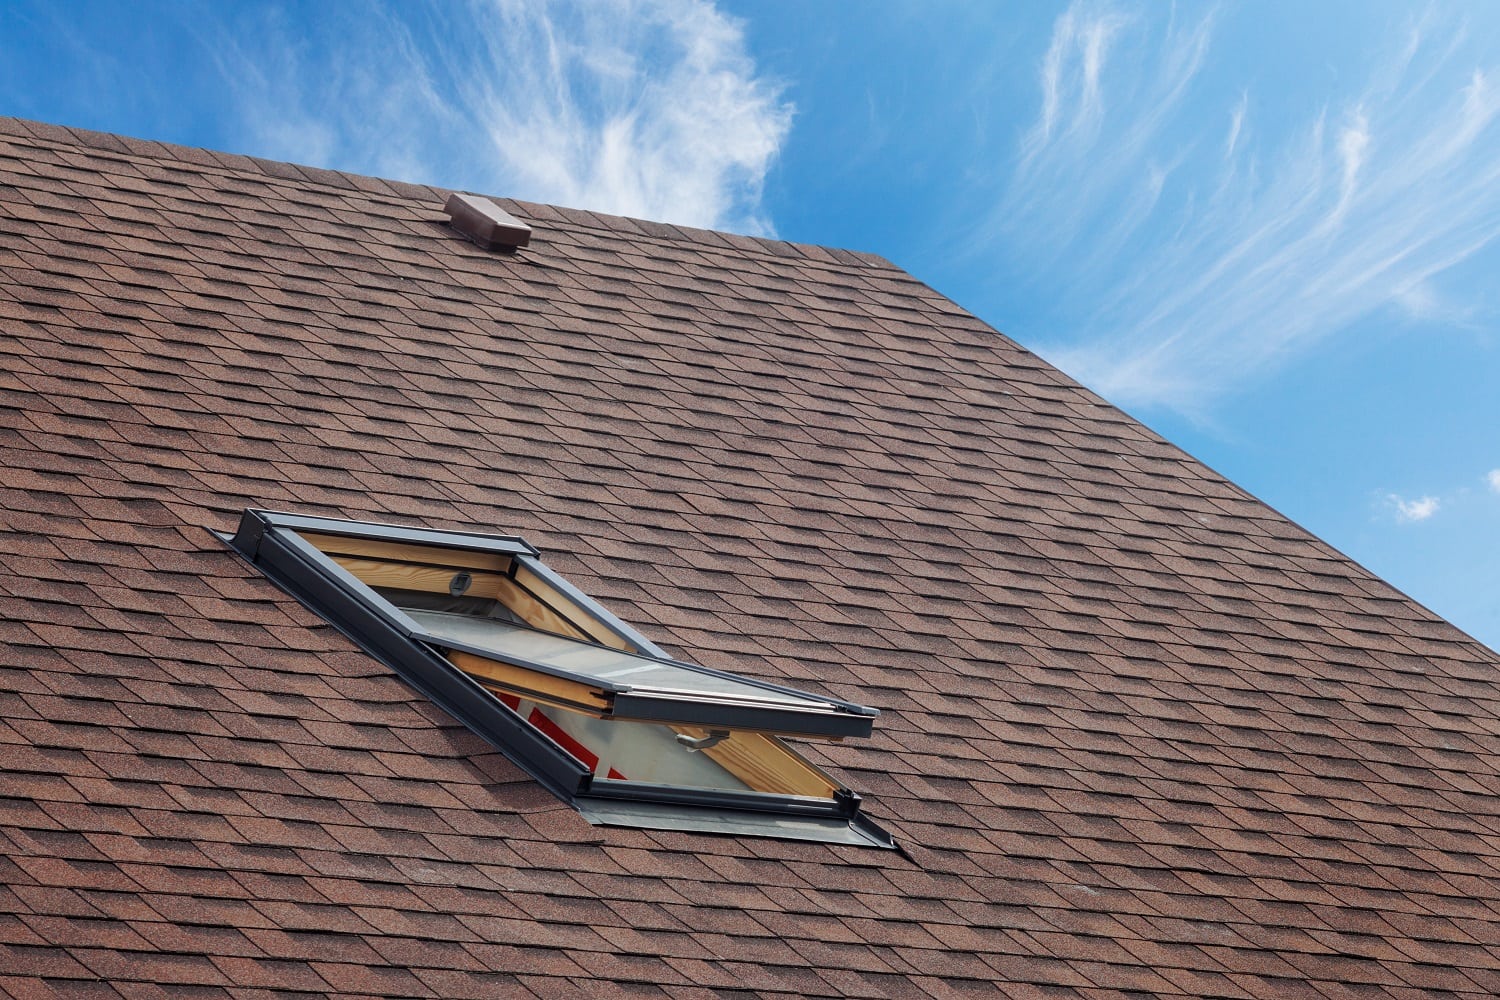 Common Roofing Terms Homeowners Should Know